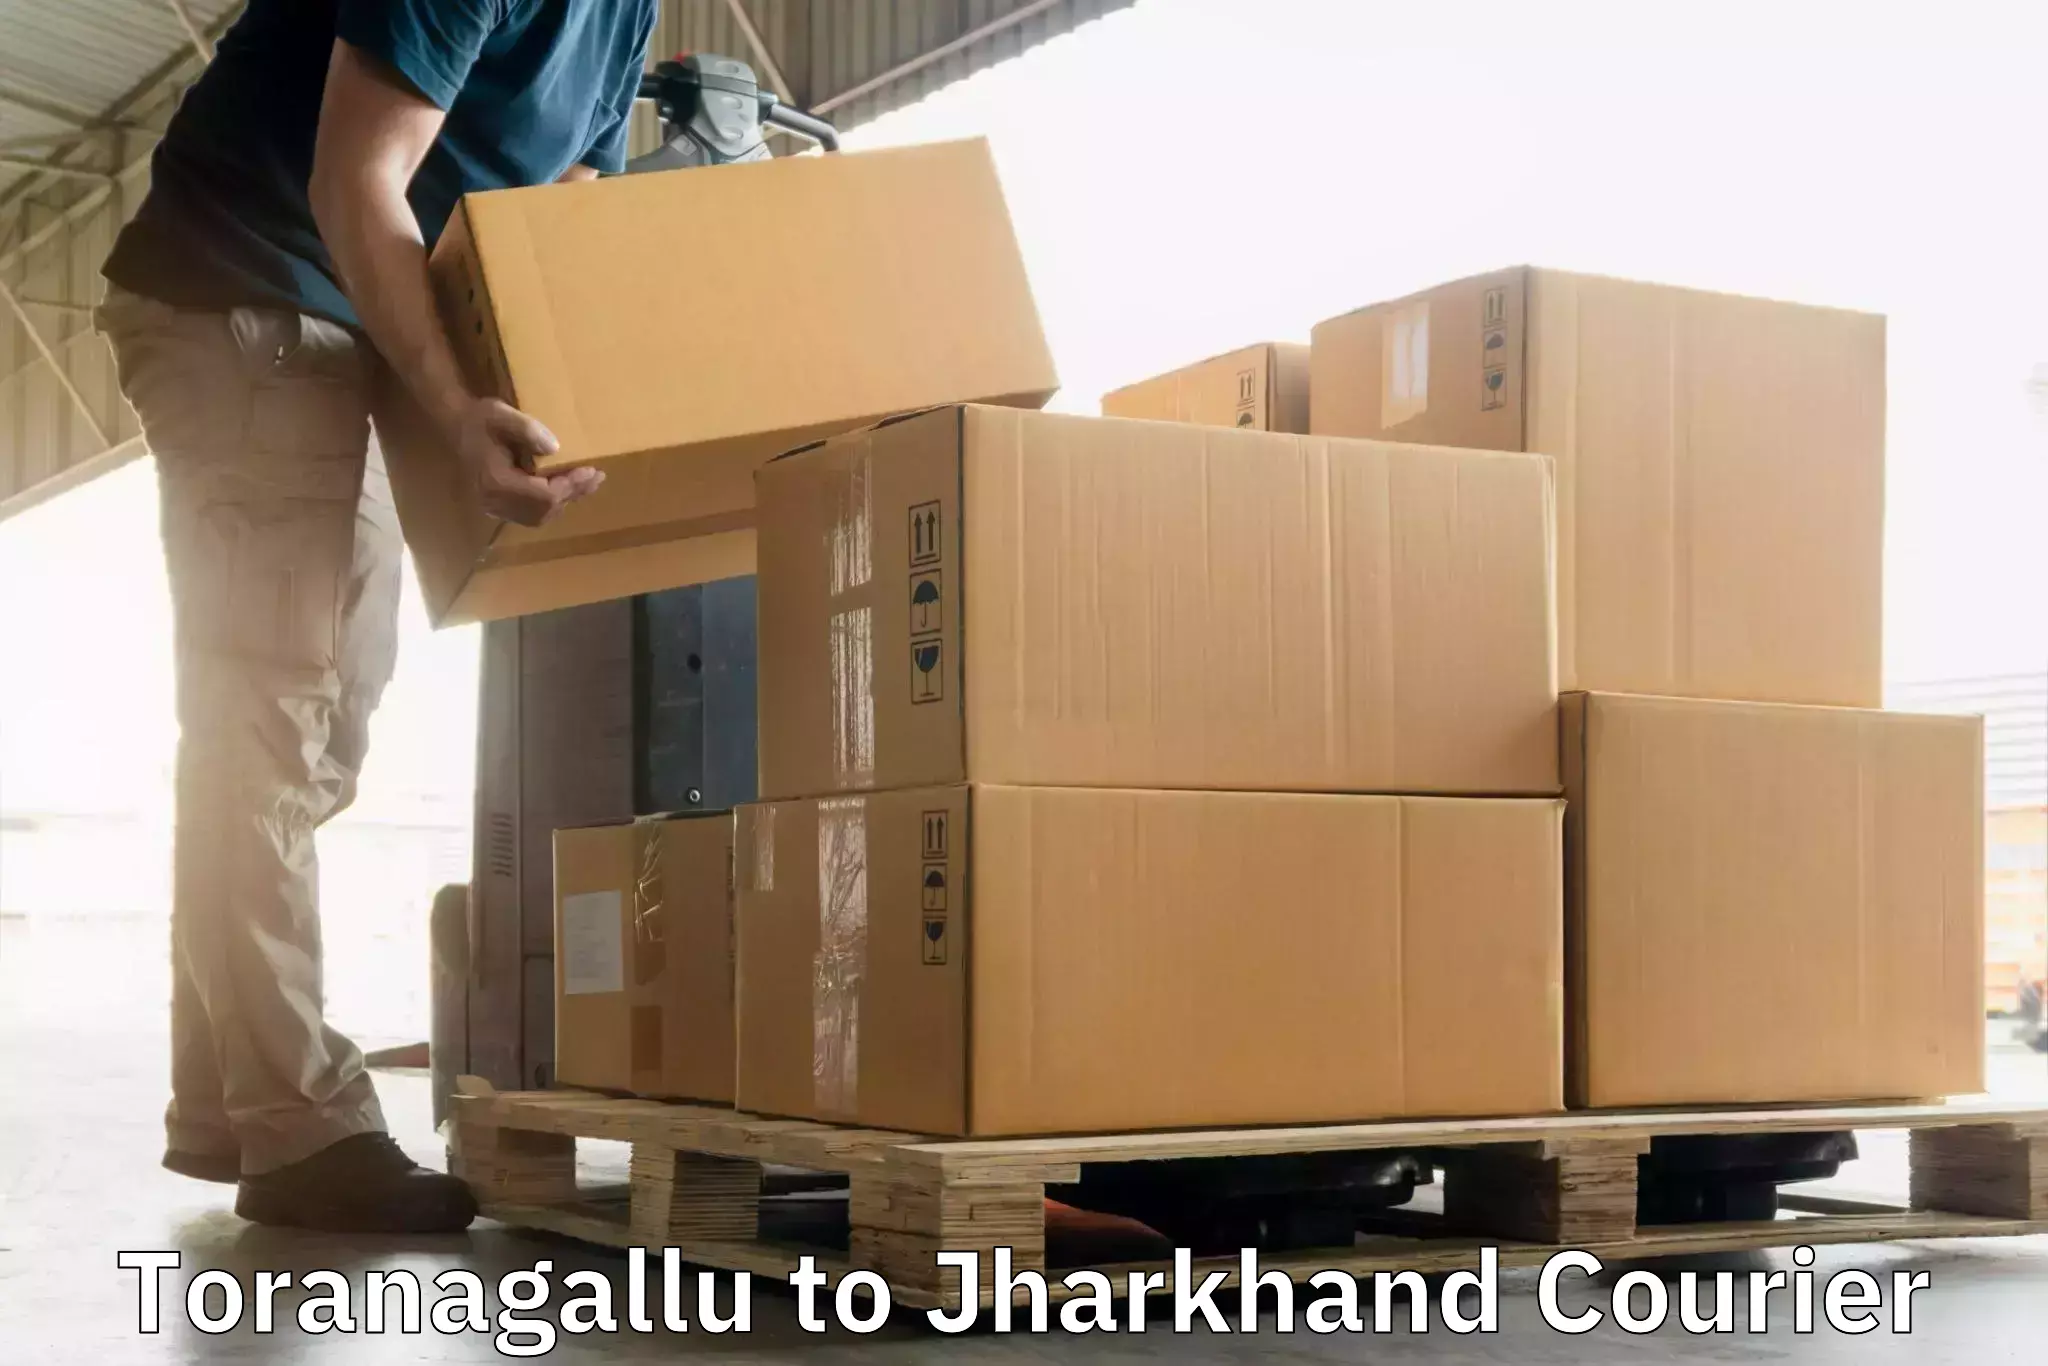 Automated parcel services Toranagallu to Jharkhand